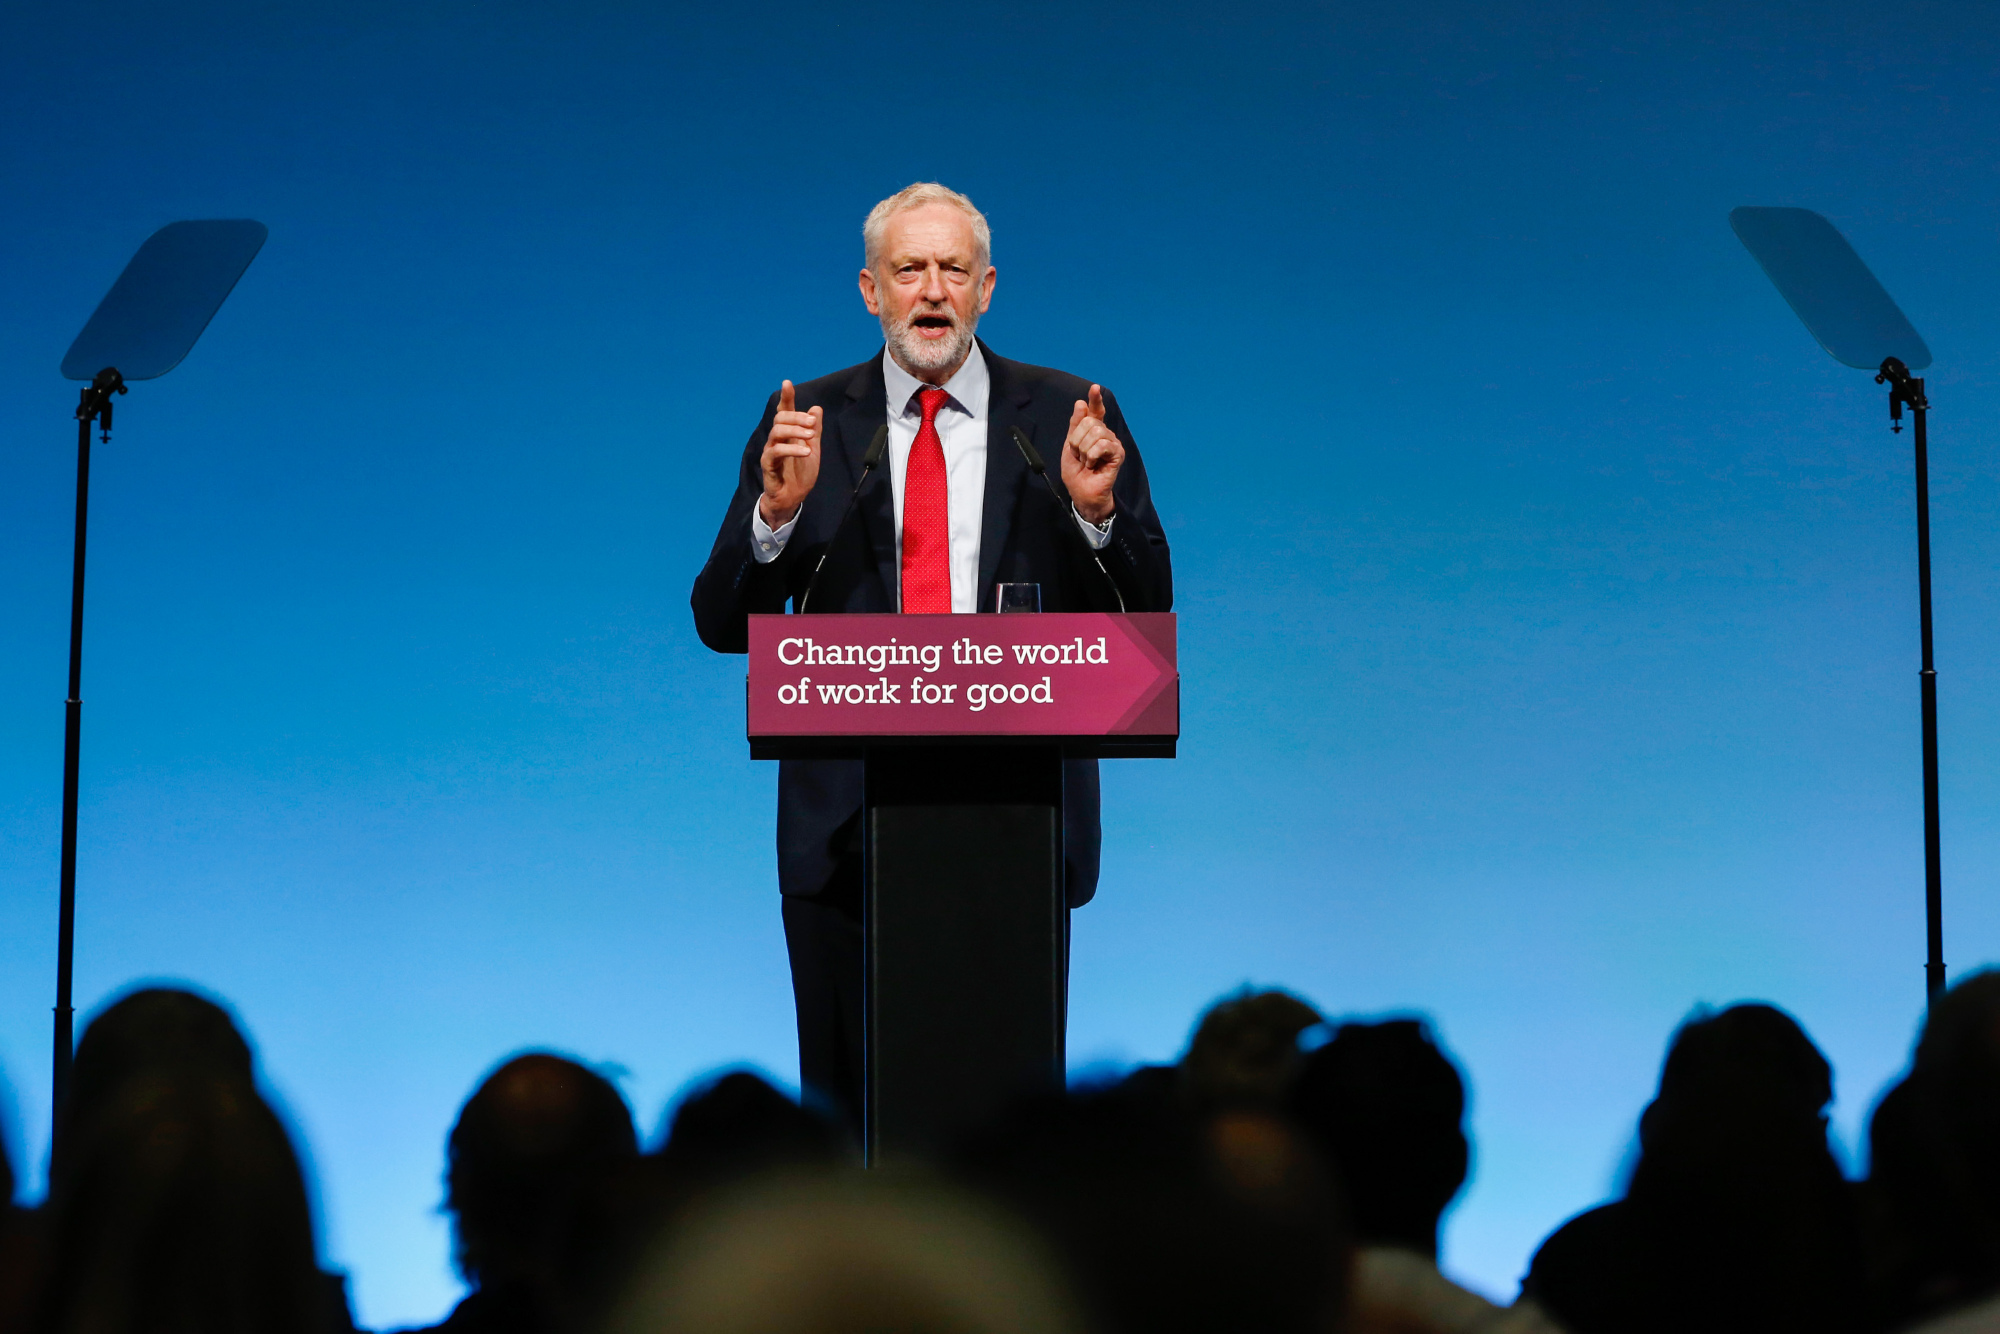 Jeremy Corbyn, leader of U.K.'s opposition Labour Party, speaks at the annual Trades Union Congress conference at Brighton, U.K., on Sep. 12, 2017.
